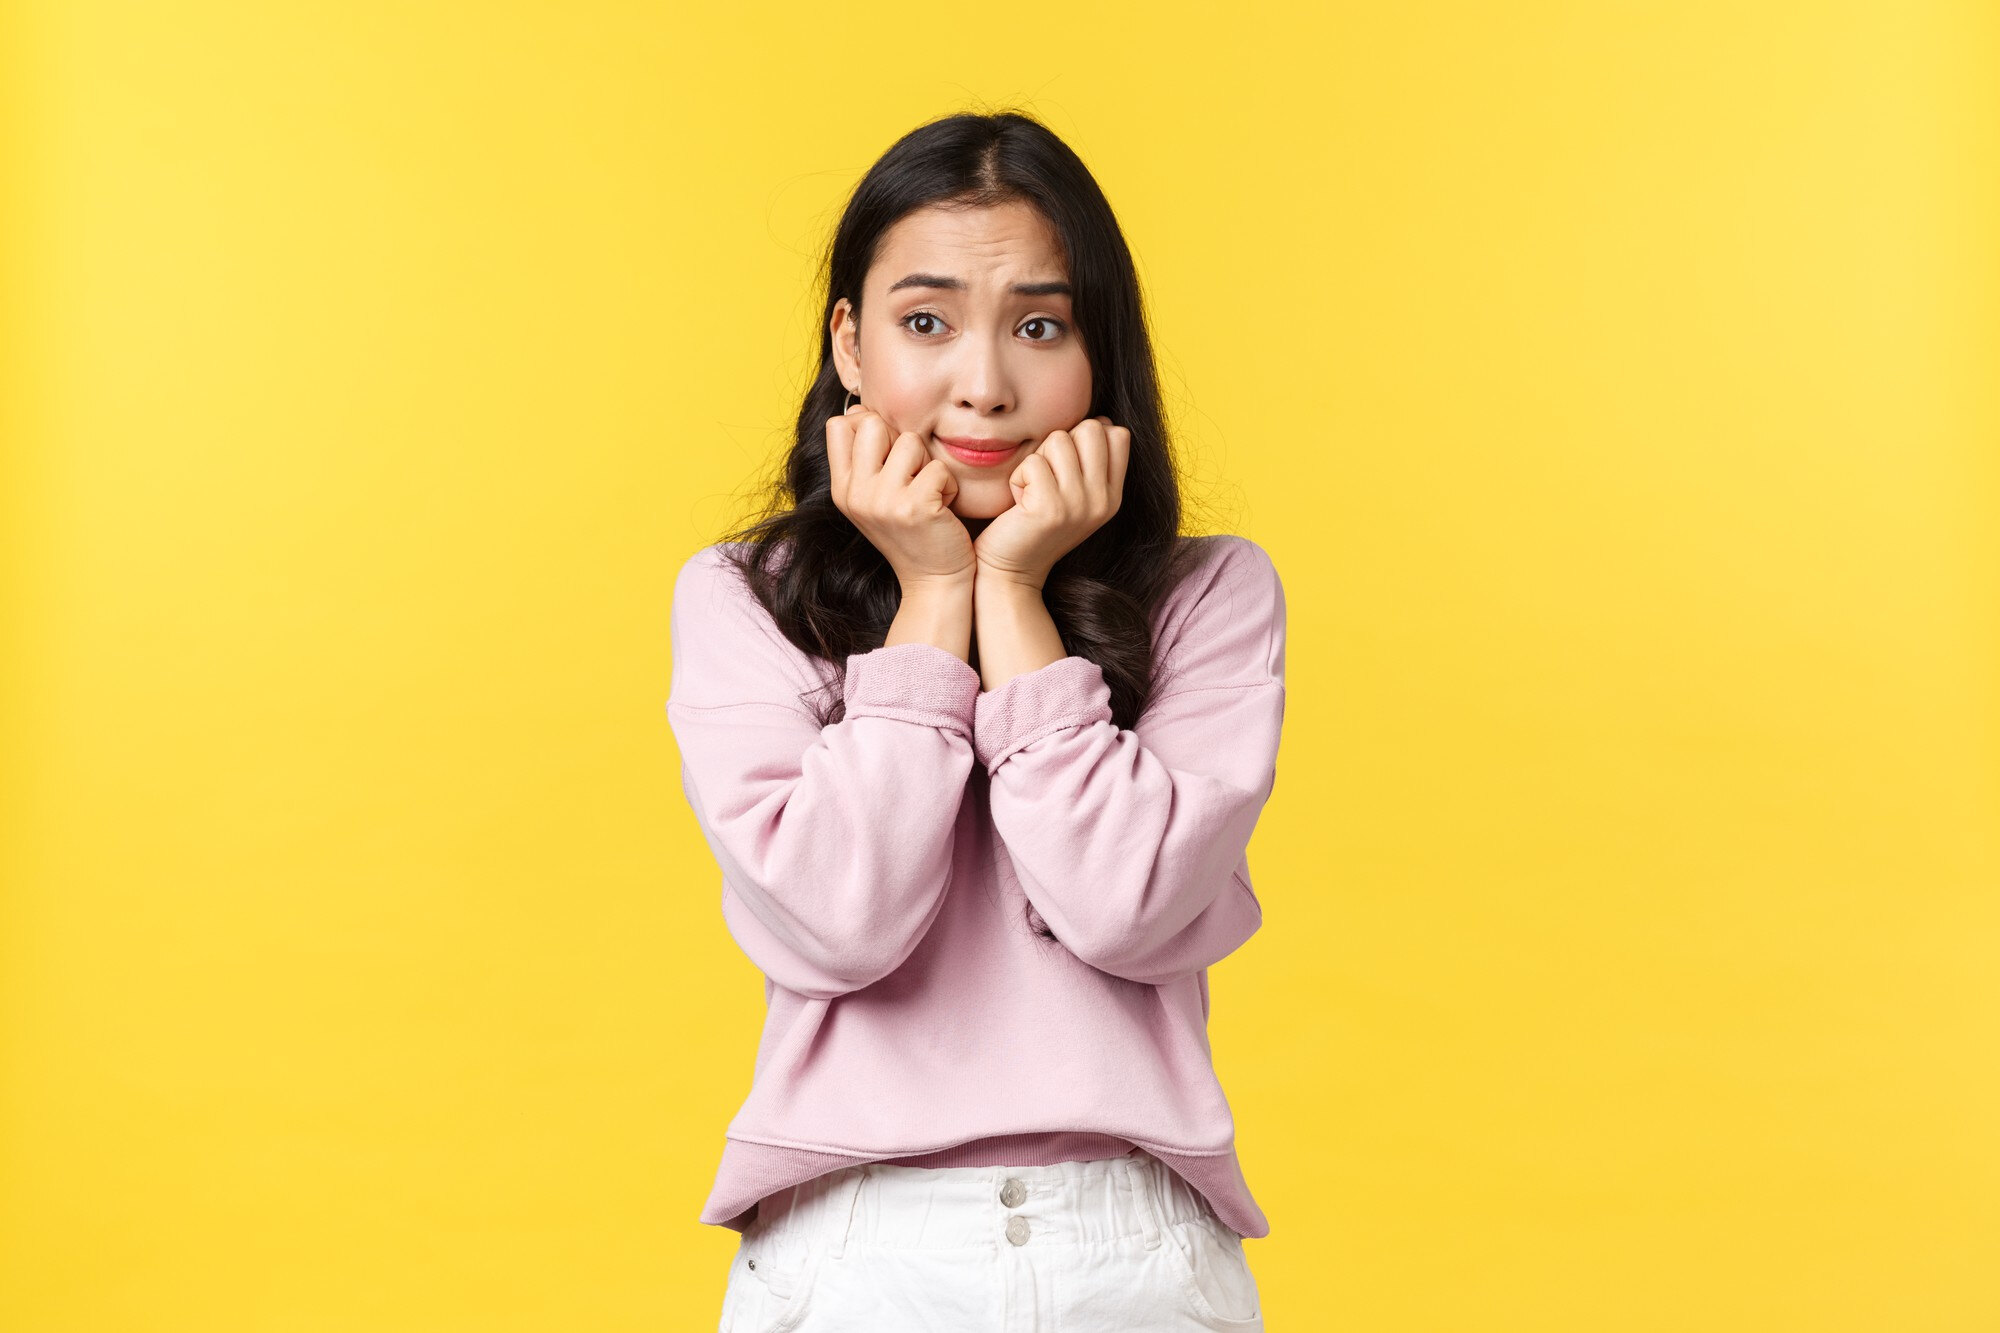  A young woman in a pink sweater and white jeans looks scared with her hands on her face, with the text "Tips mengatasi mimpi buruk bertemu nenek moyang" in Indonesian.